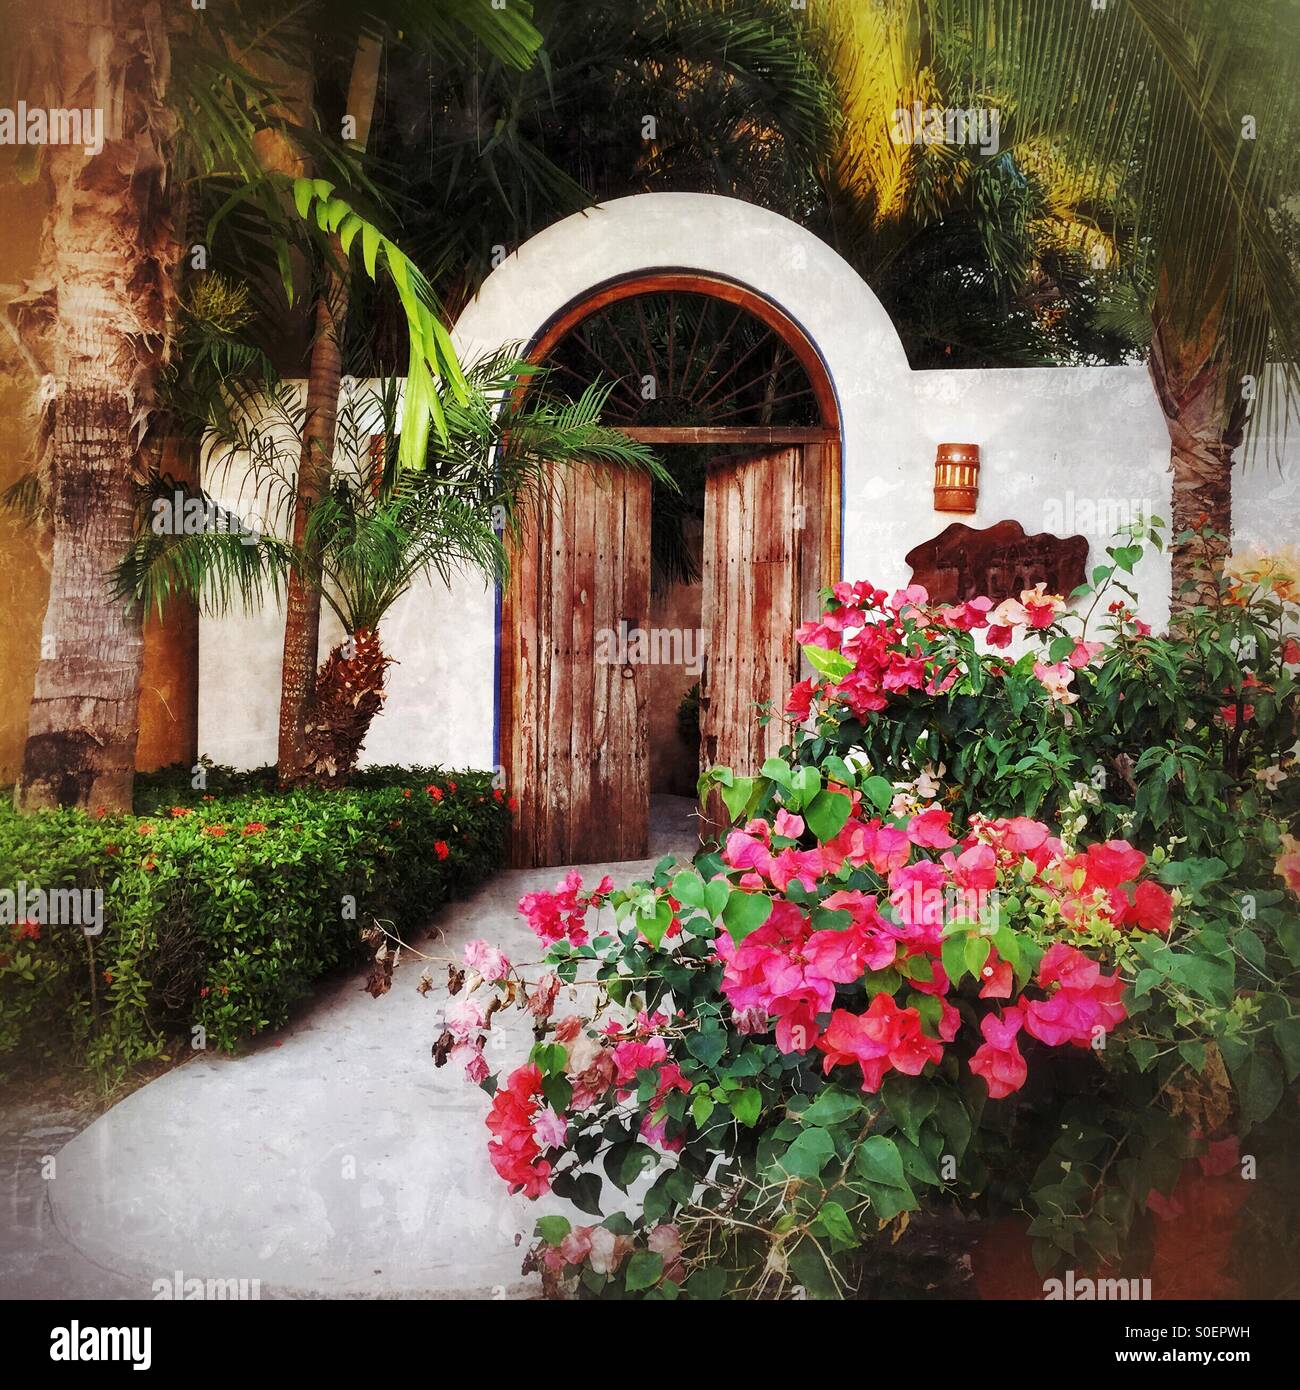 A charming entrance to a residential home features an antique wooden door under an arch and a walkway filled with tropical and colorful plants. Stock Photo